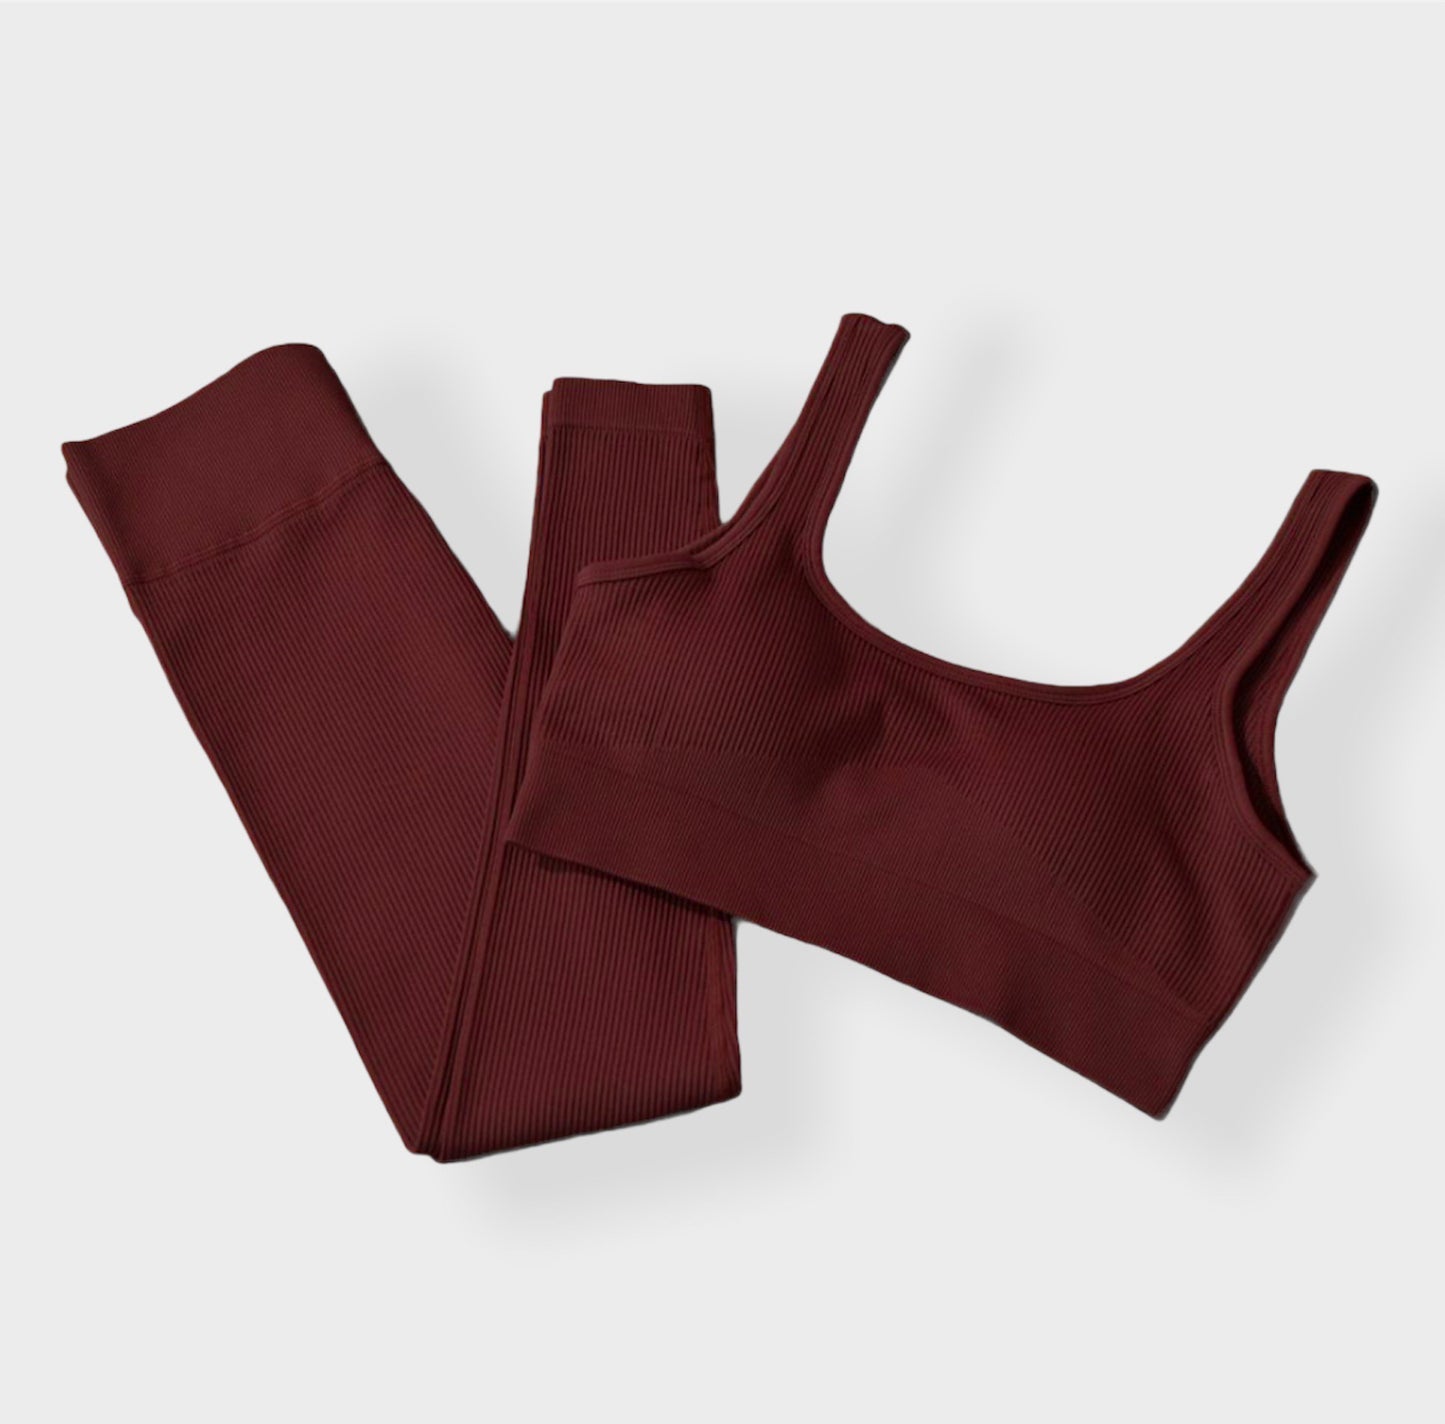 MAROON SET (Leggings + Top) Ribbed Collection